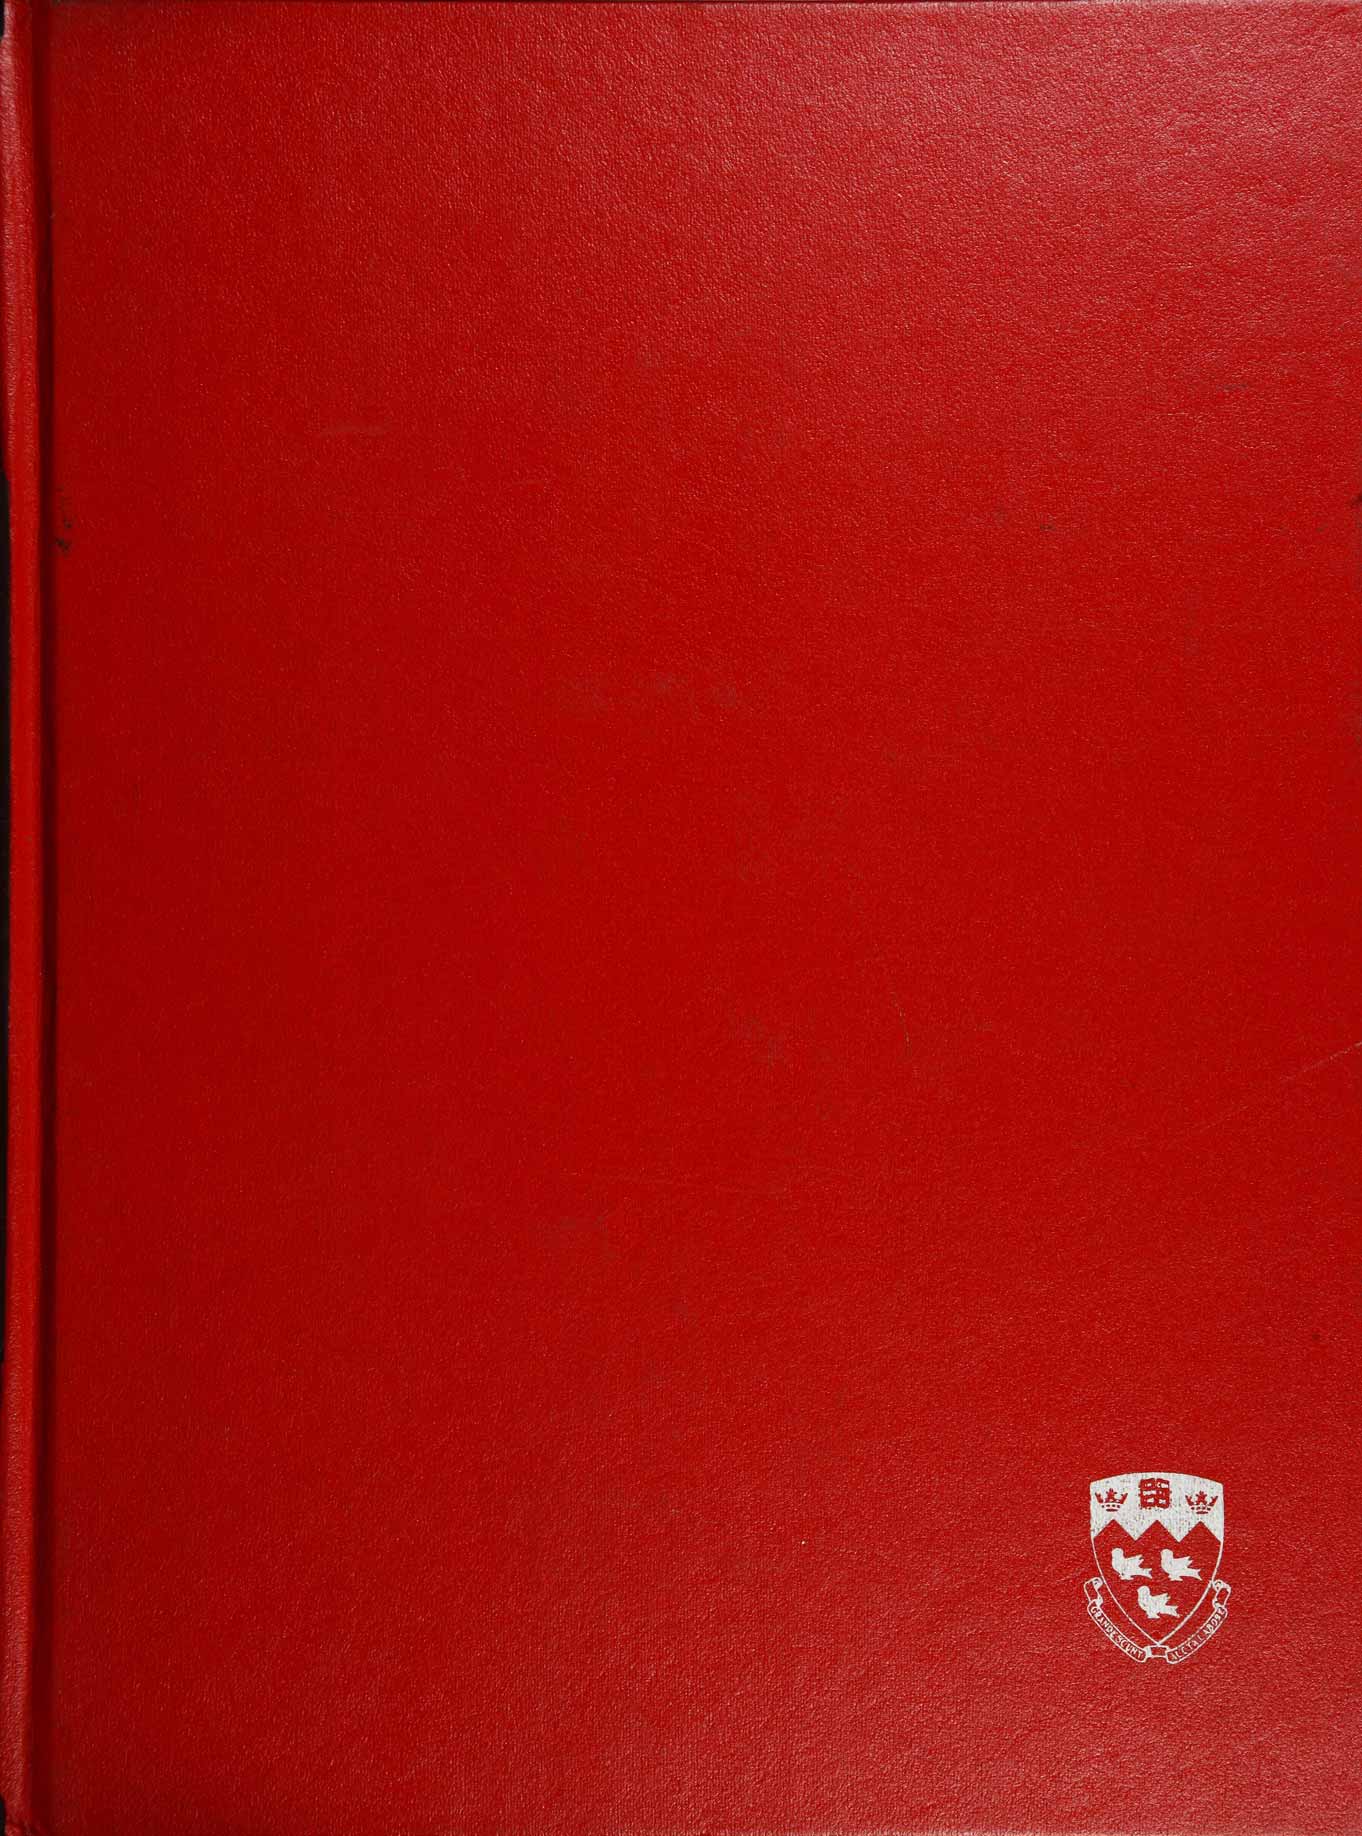 McGill Yearbook: 1978